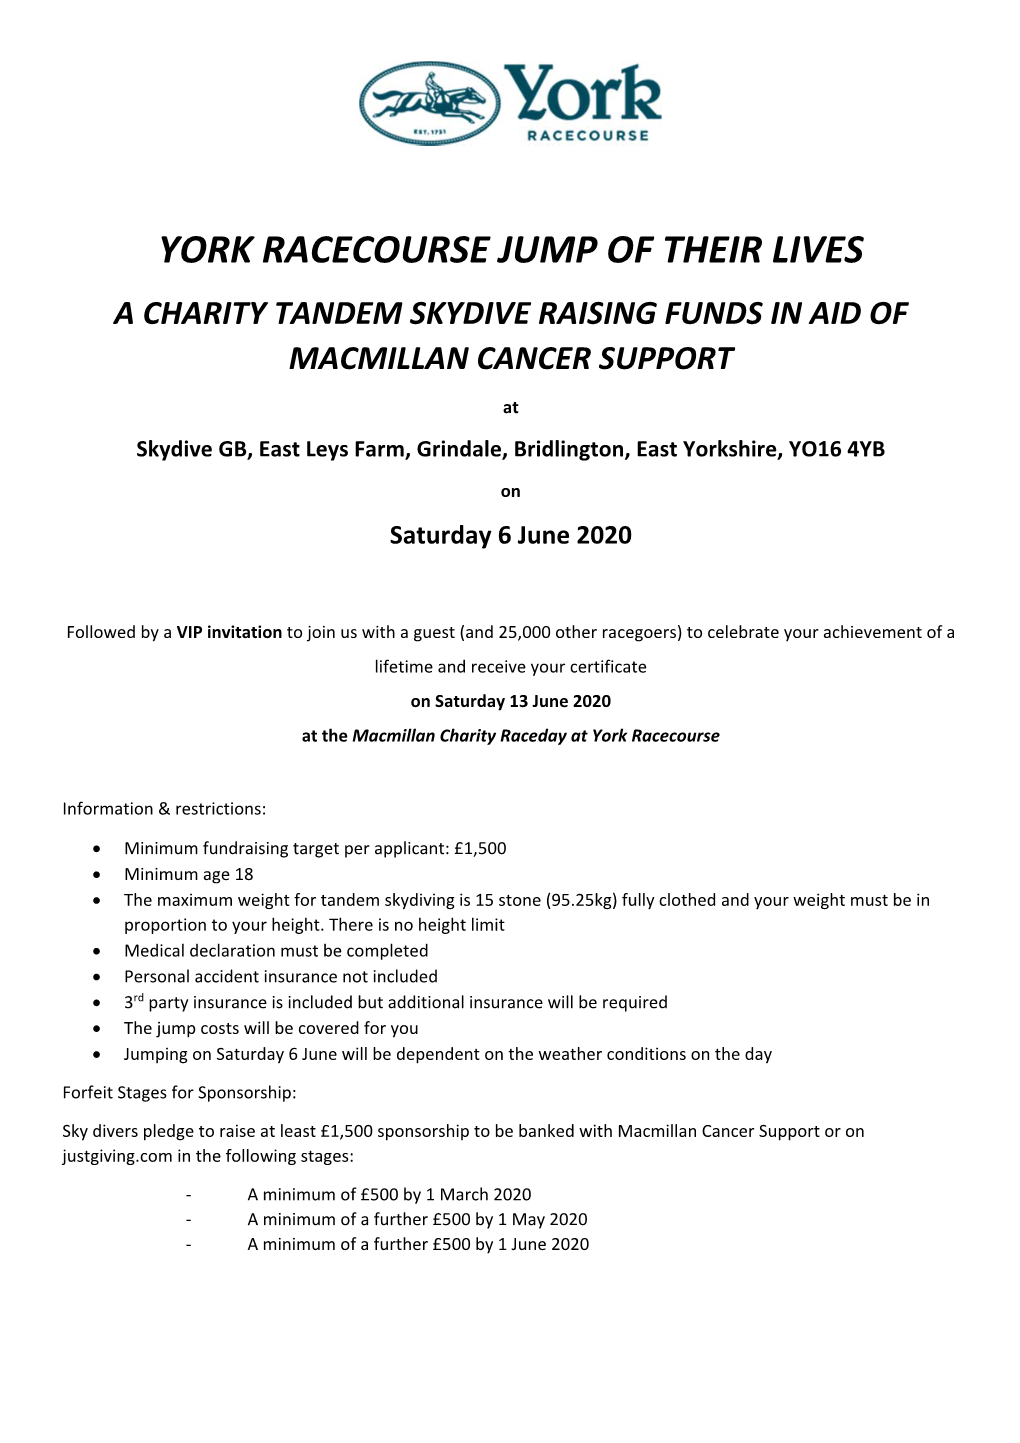 York Racecourse Jump of Their Lives a Charity Tandem Skydive Raising Funds in Aid of Macmillan Cancer Support